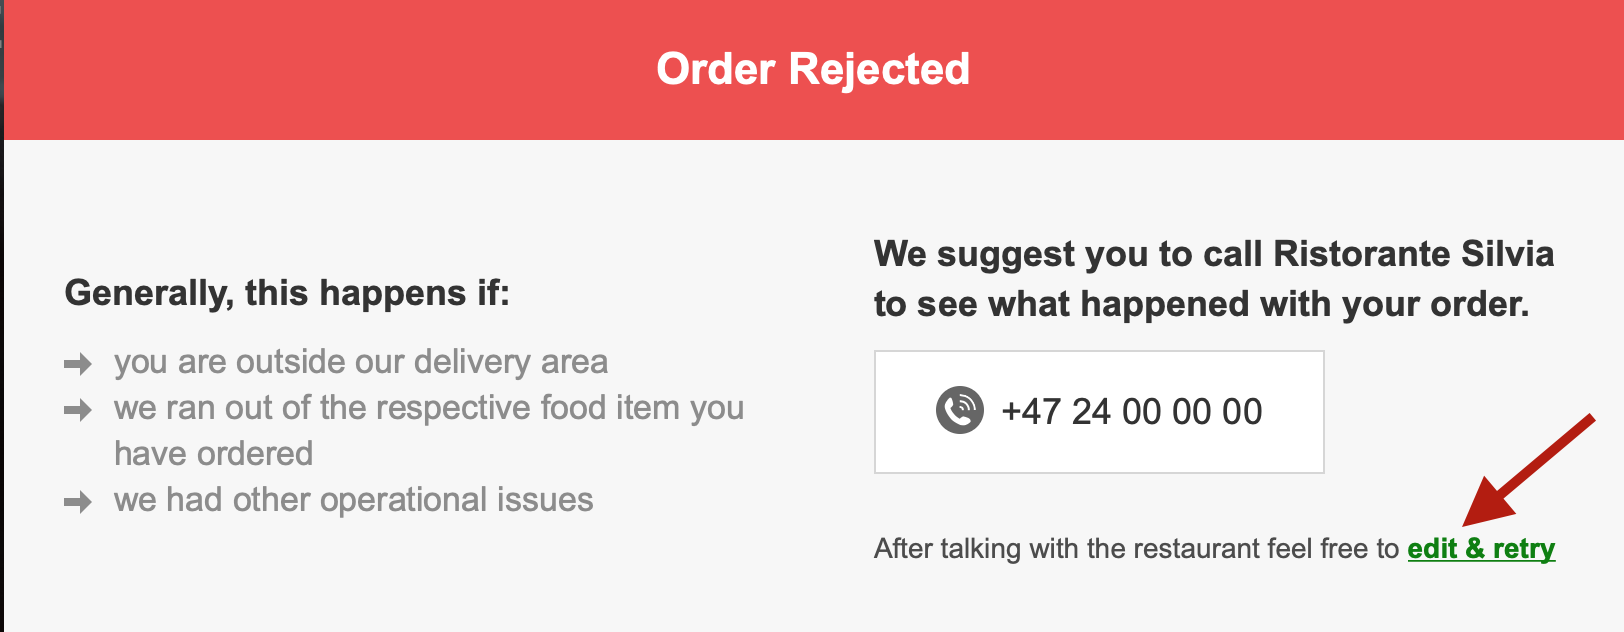 How to relaunch a missed or rejected order? 1